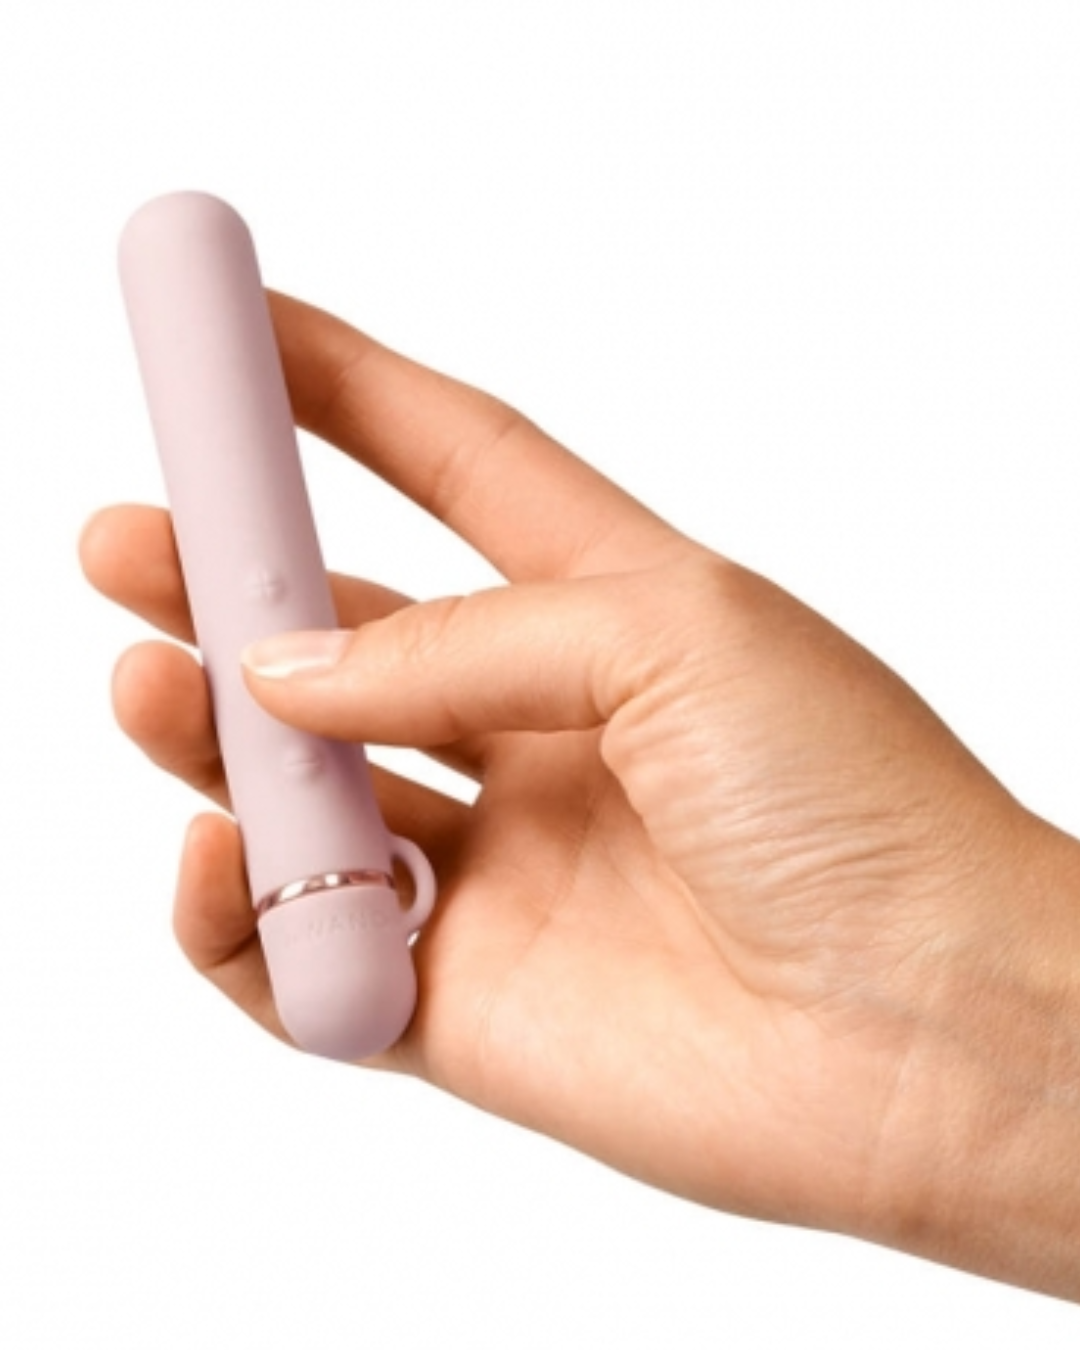 Le Wand Baton Slim Rechargeable Waterproof Vibrator - Rose Gold held in a h and